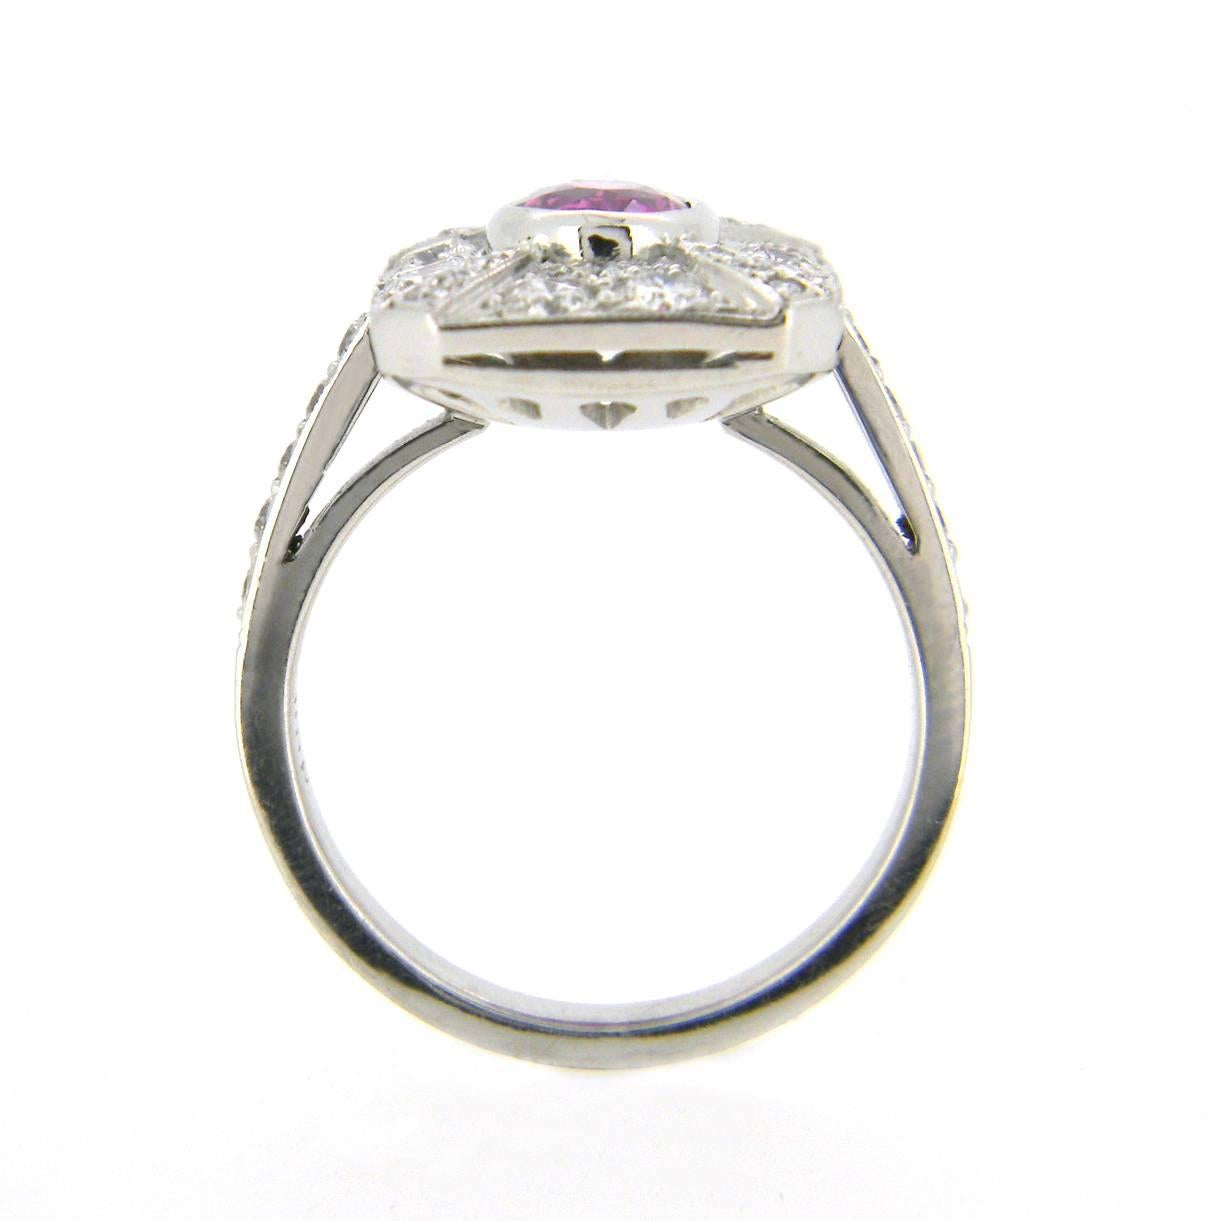 Handmade 18 karat white gold pink sapphire and diamond Art Deco style ring centred with a vibrant oval cut 1.58ct natural pink sapphire of a dark bright pink colour (slightly deeper pink than purple tone as photo shows)surrounded with 0.95cts of